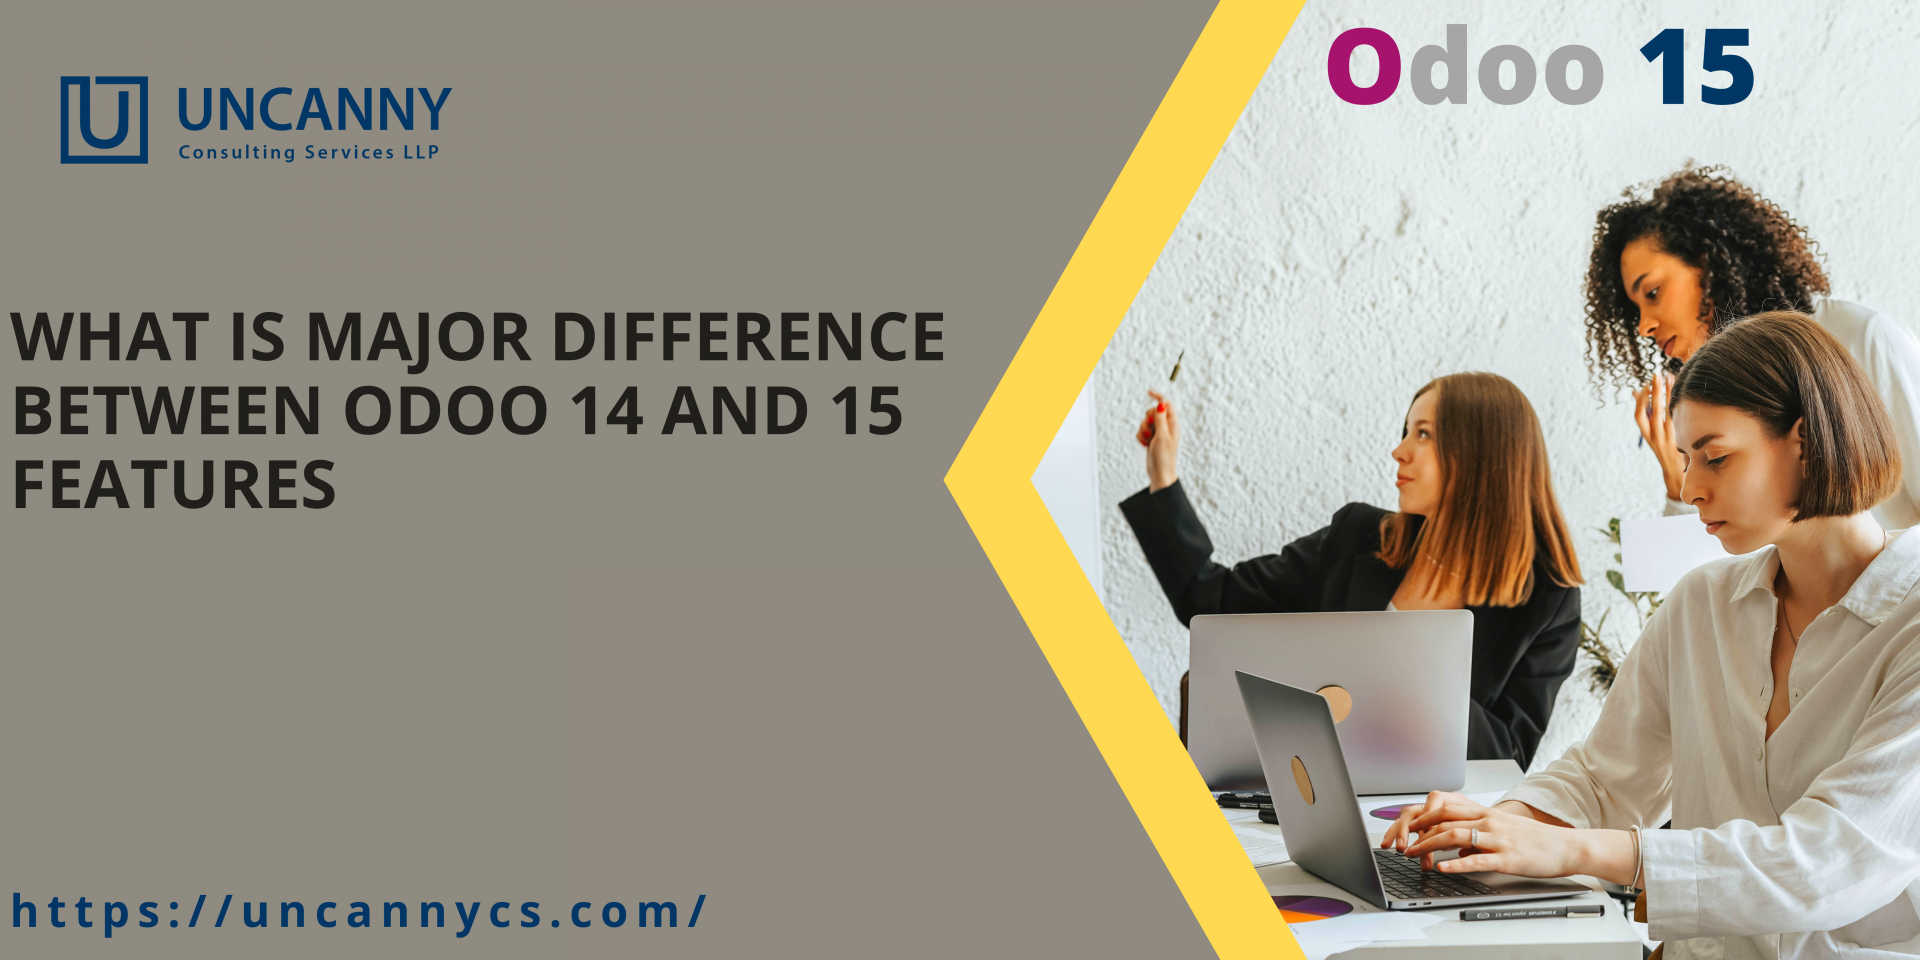 What is major difference between Odoo 14 and Odoo15 features